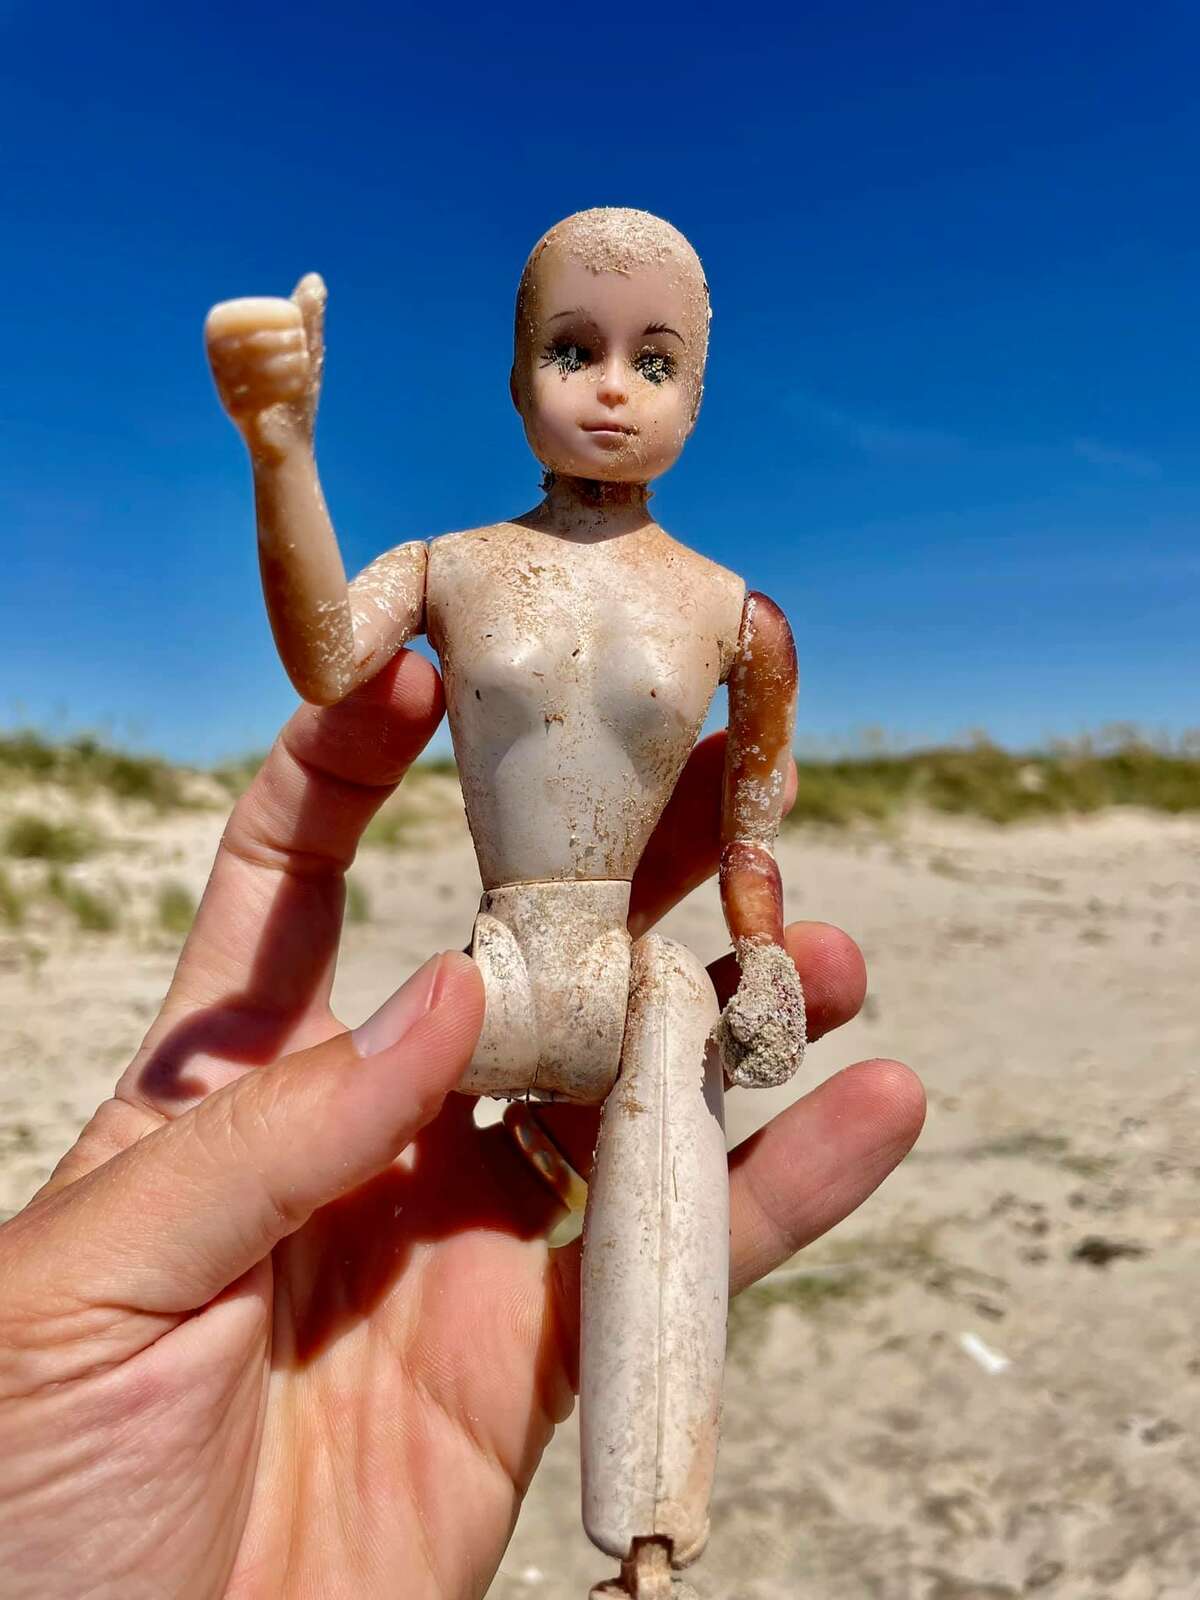 Researchers from the Mission-Aransas Reserve continue to find dolls that get washed ashore along the Texas Gulf Coast. The dolls are disturbing to look at but raise money for the institute's research.